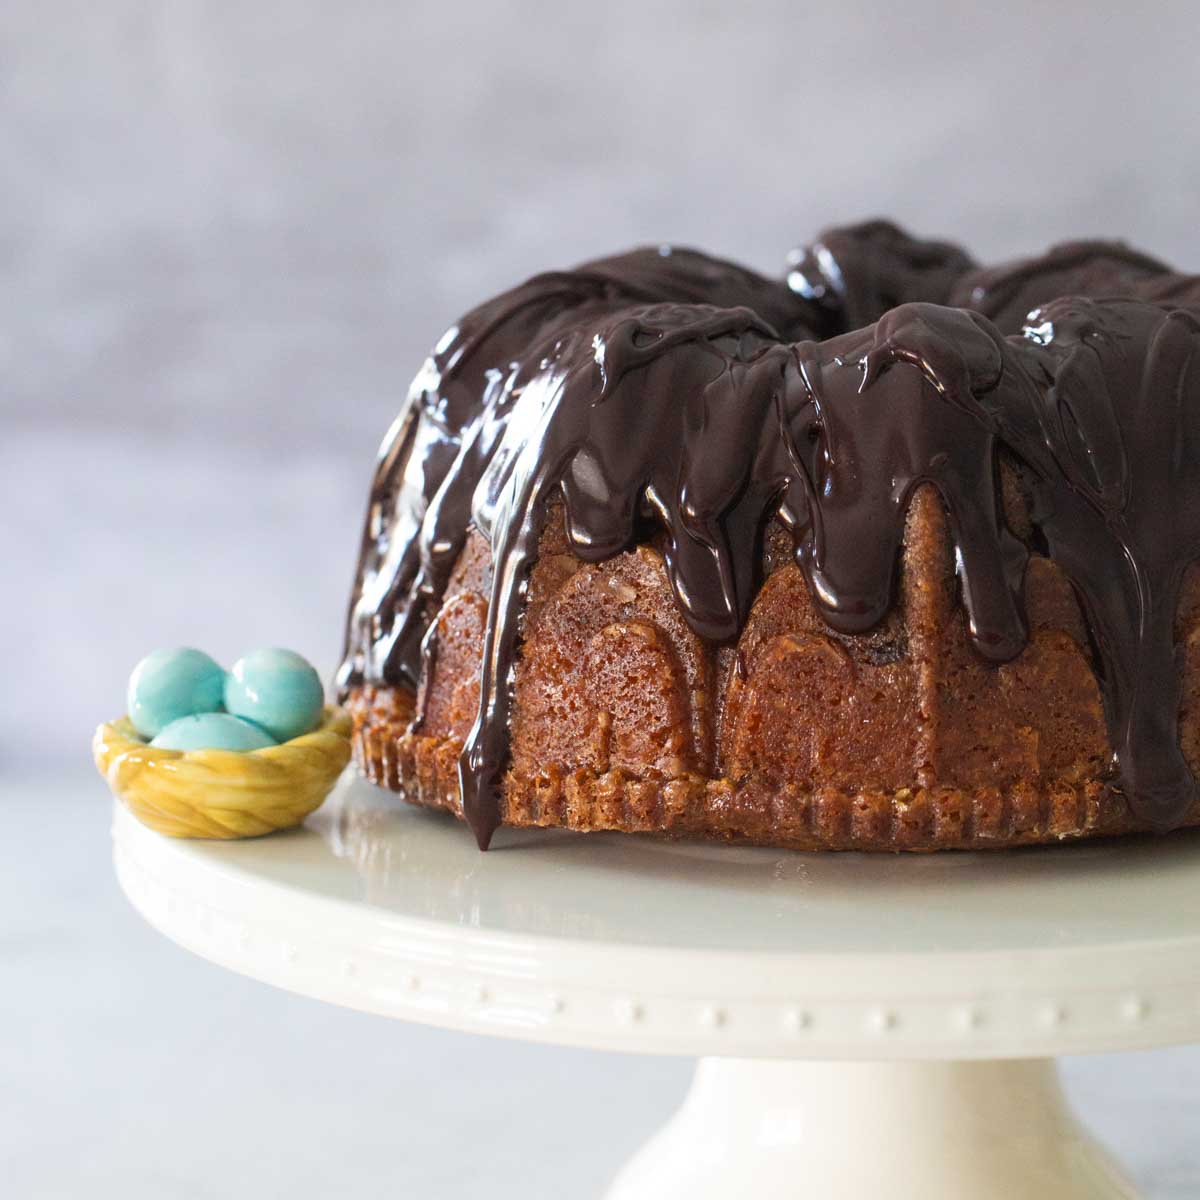 A chocolate glazed bundt cake sits on a white cake plate with a blue robins egg decoration to the left.